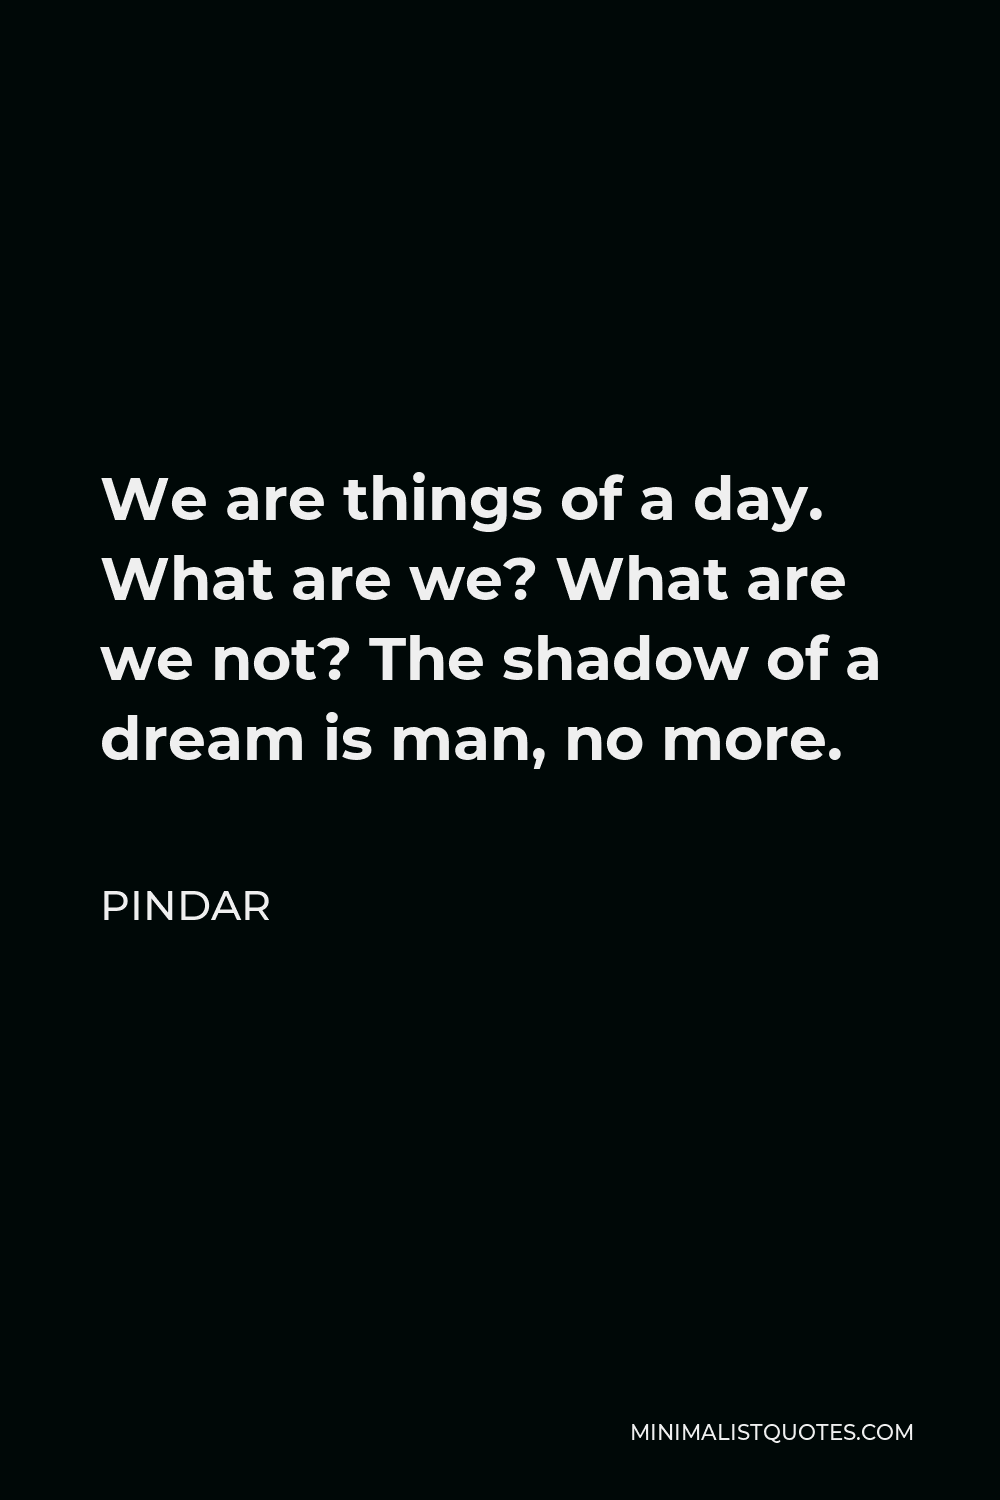 Pindar Quote - We are things of a day. What are we? What are we not? The shadow of a dream is man, no more.